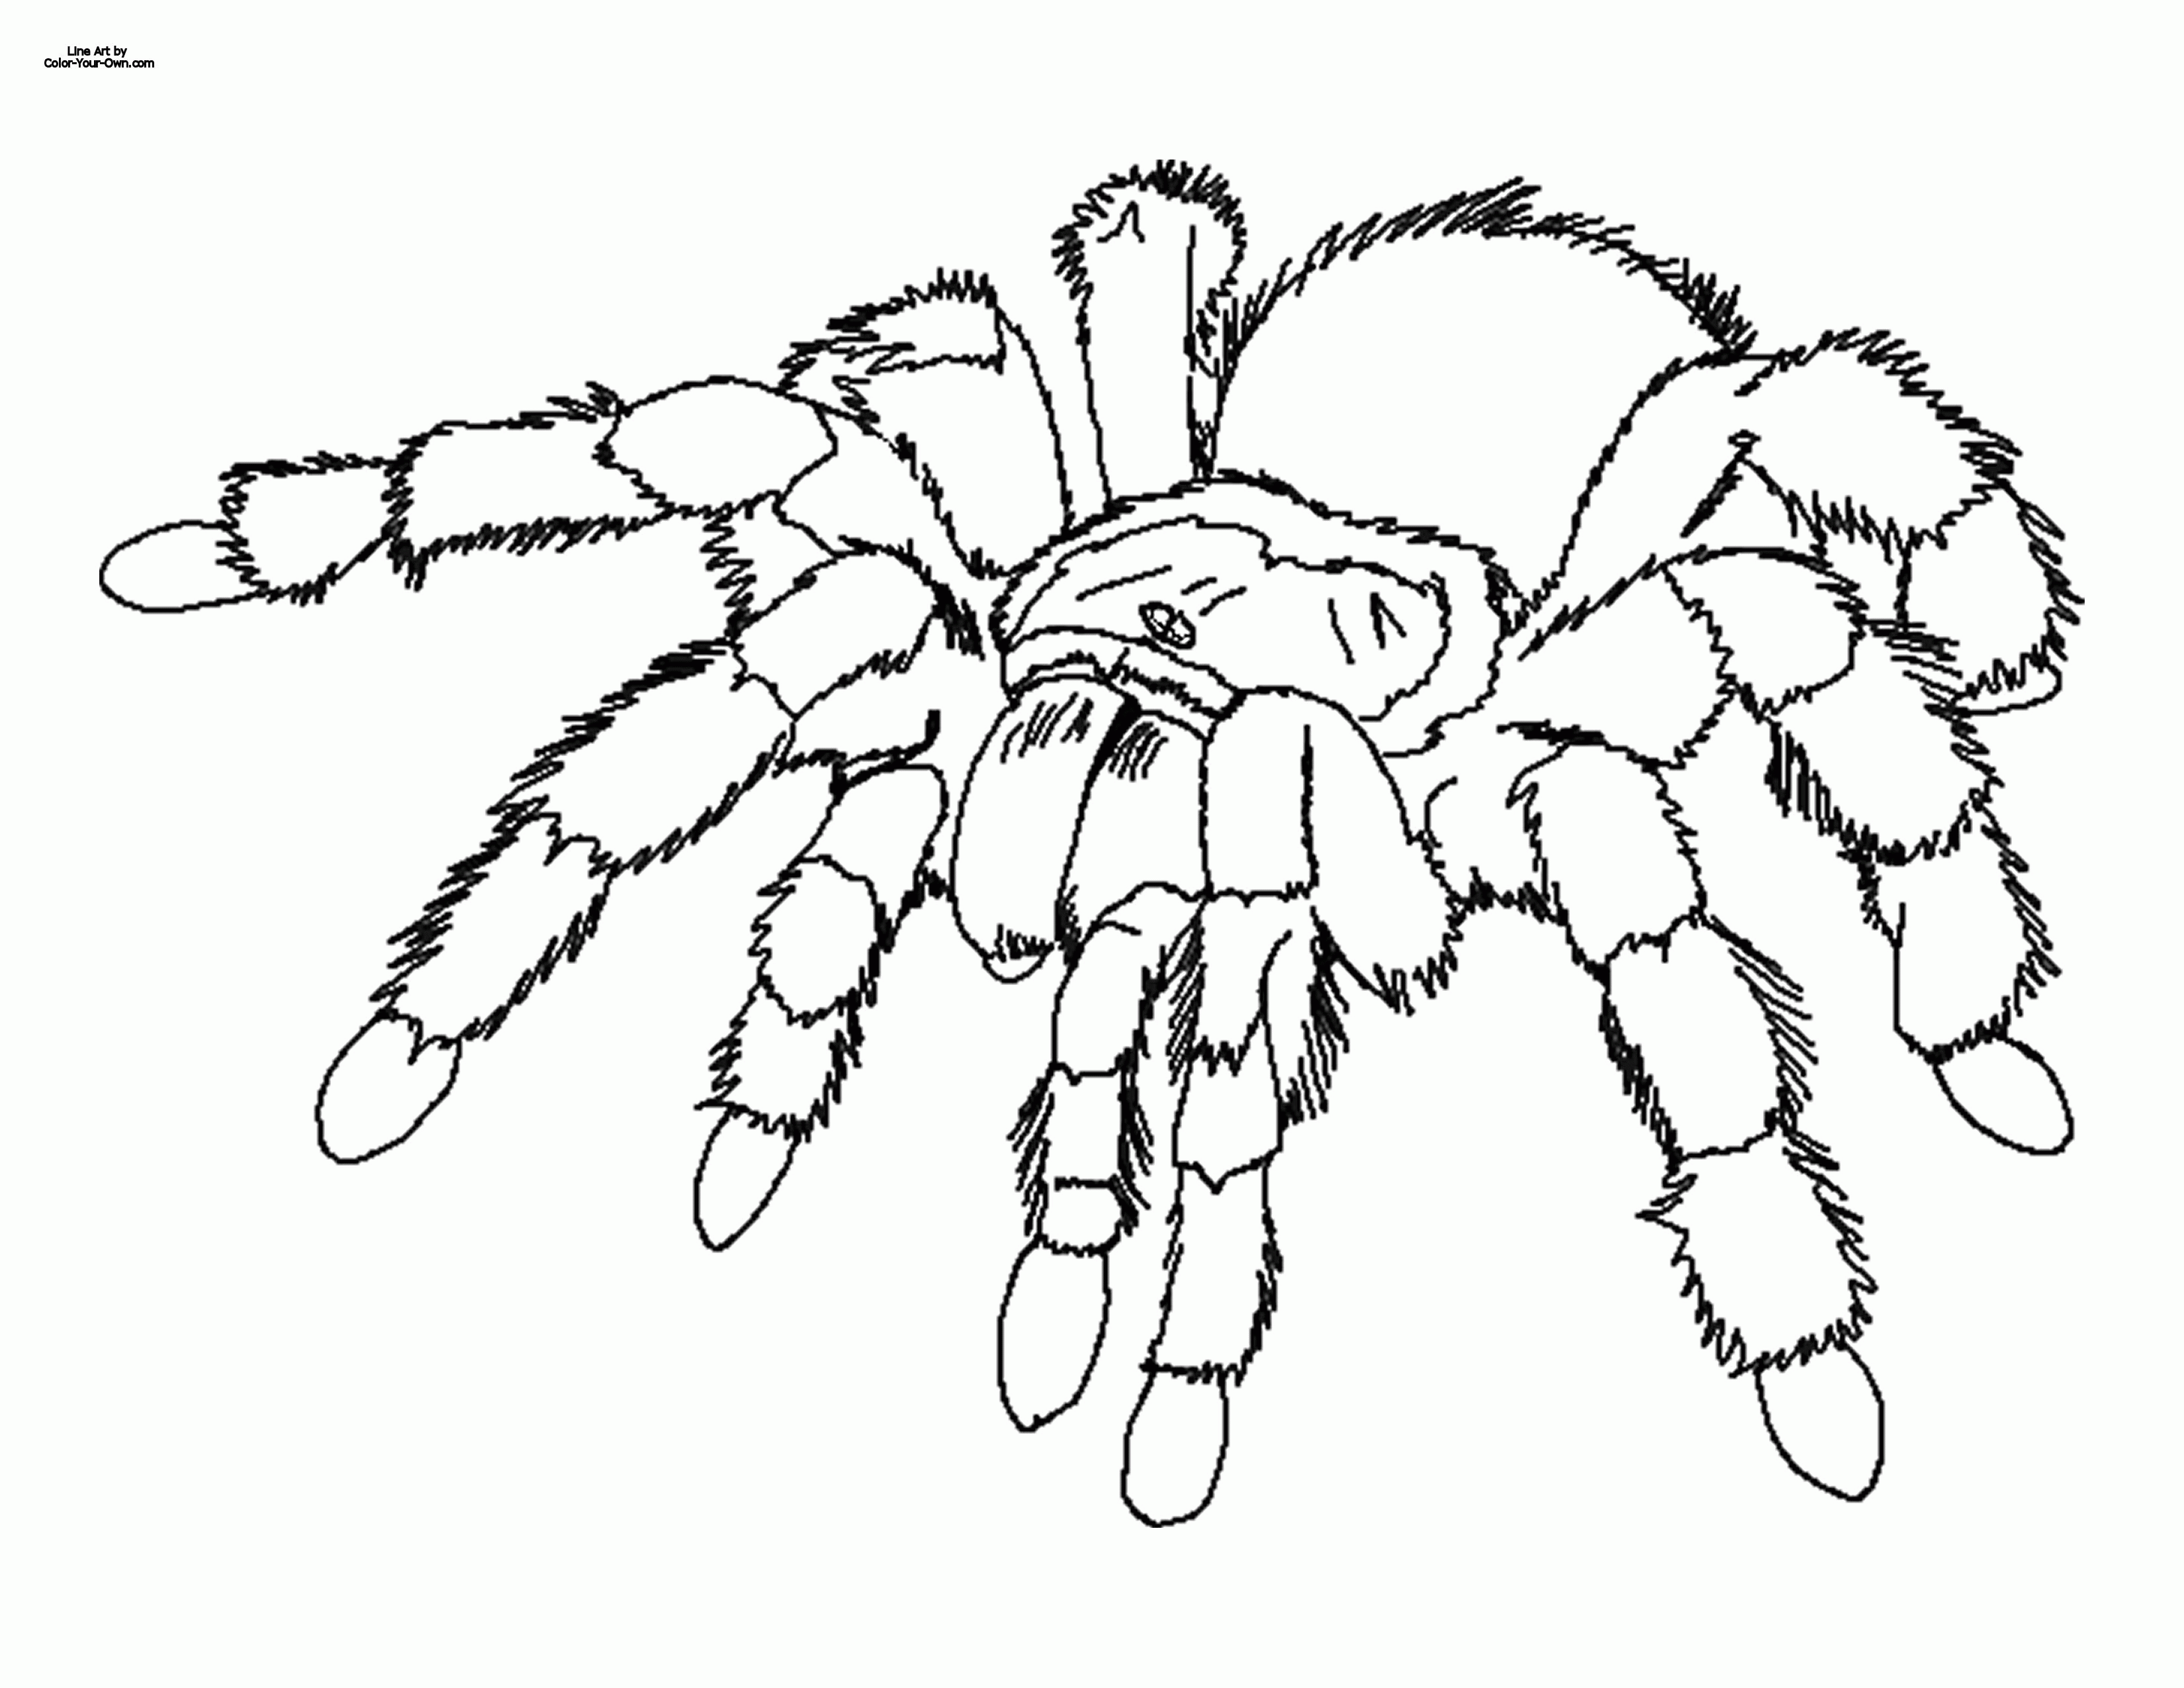 Spider Colouring In Page - Coloring Page Photos